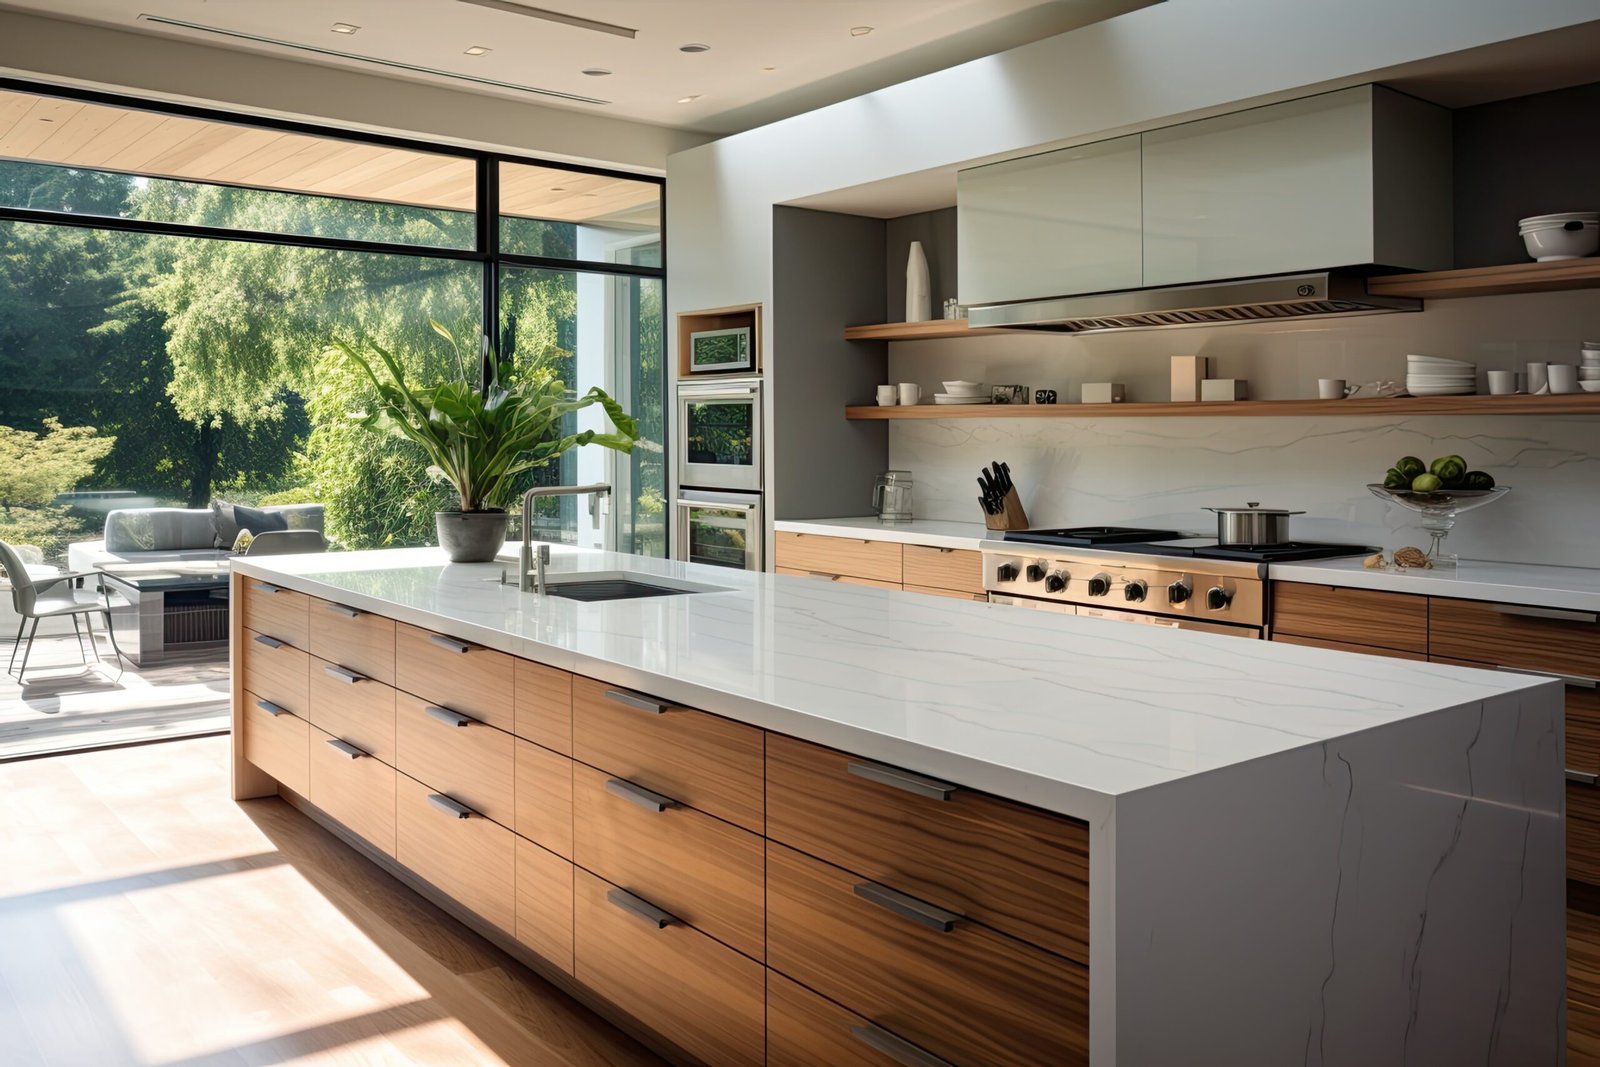 A contemporary kitchen design that includes a window.